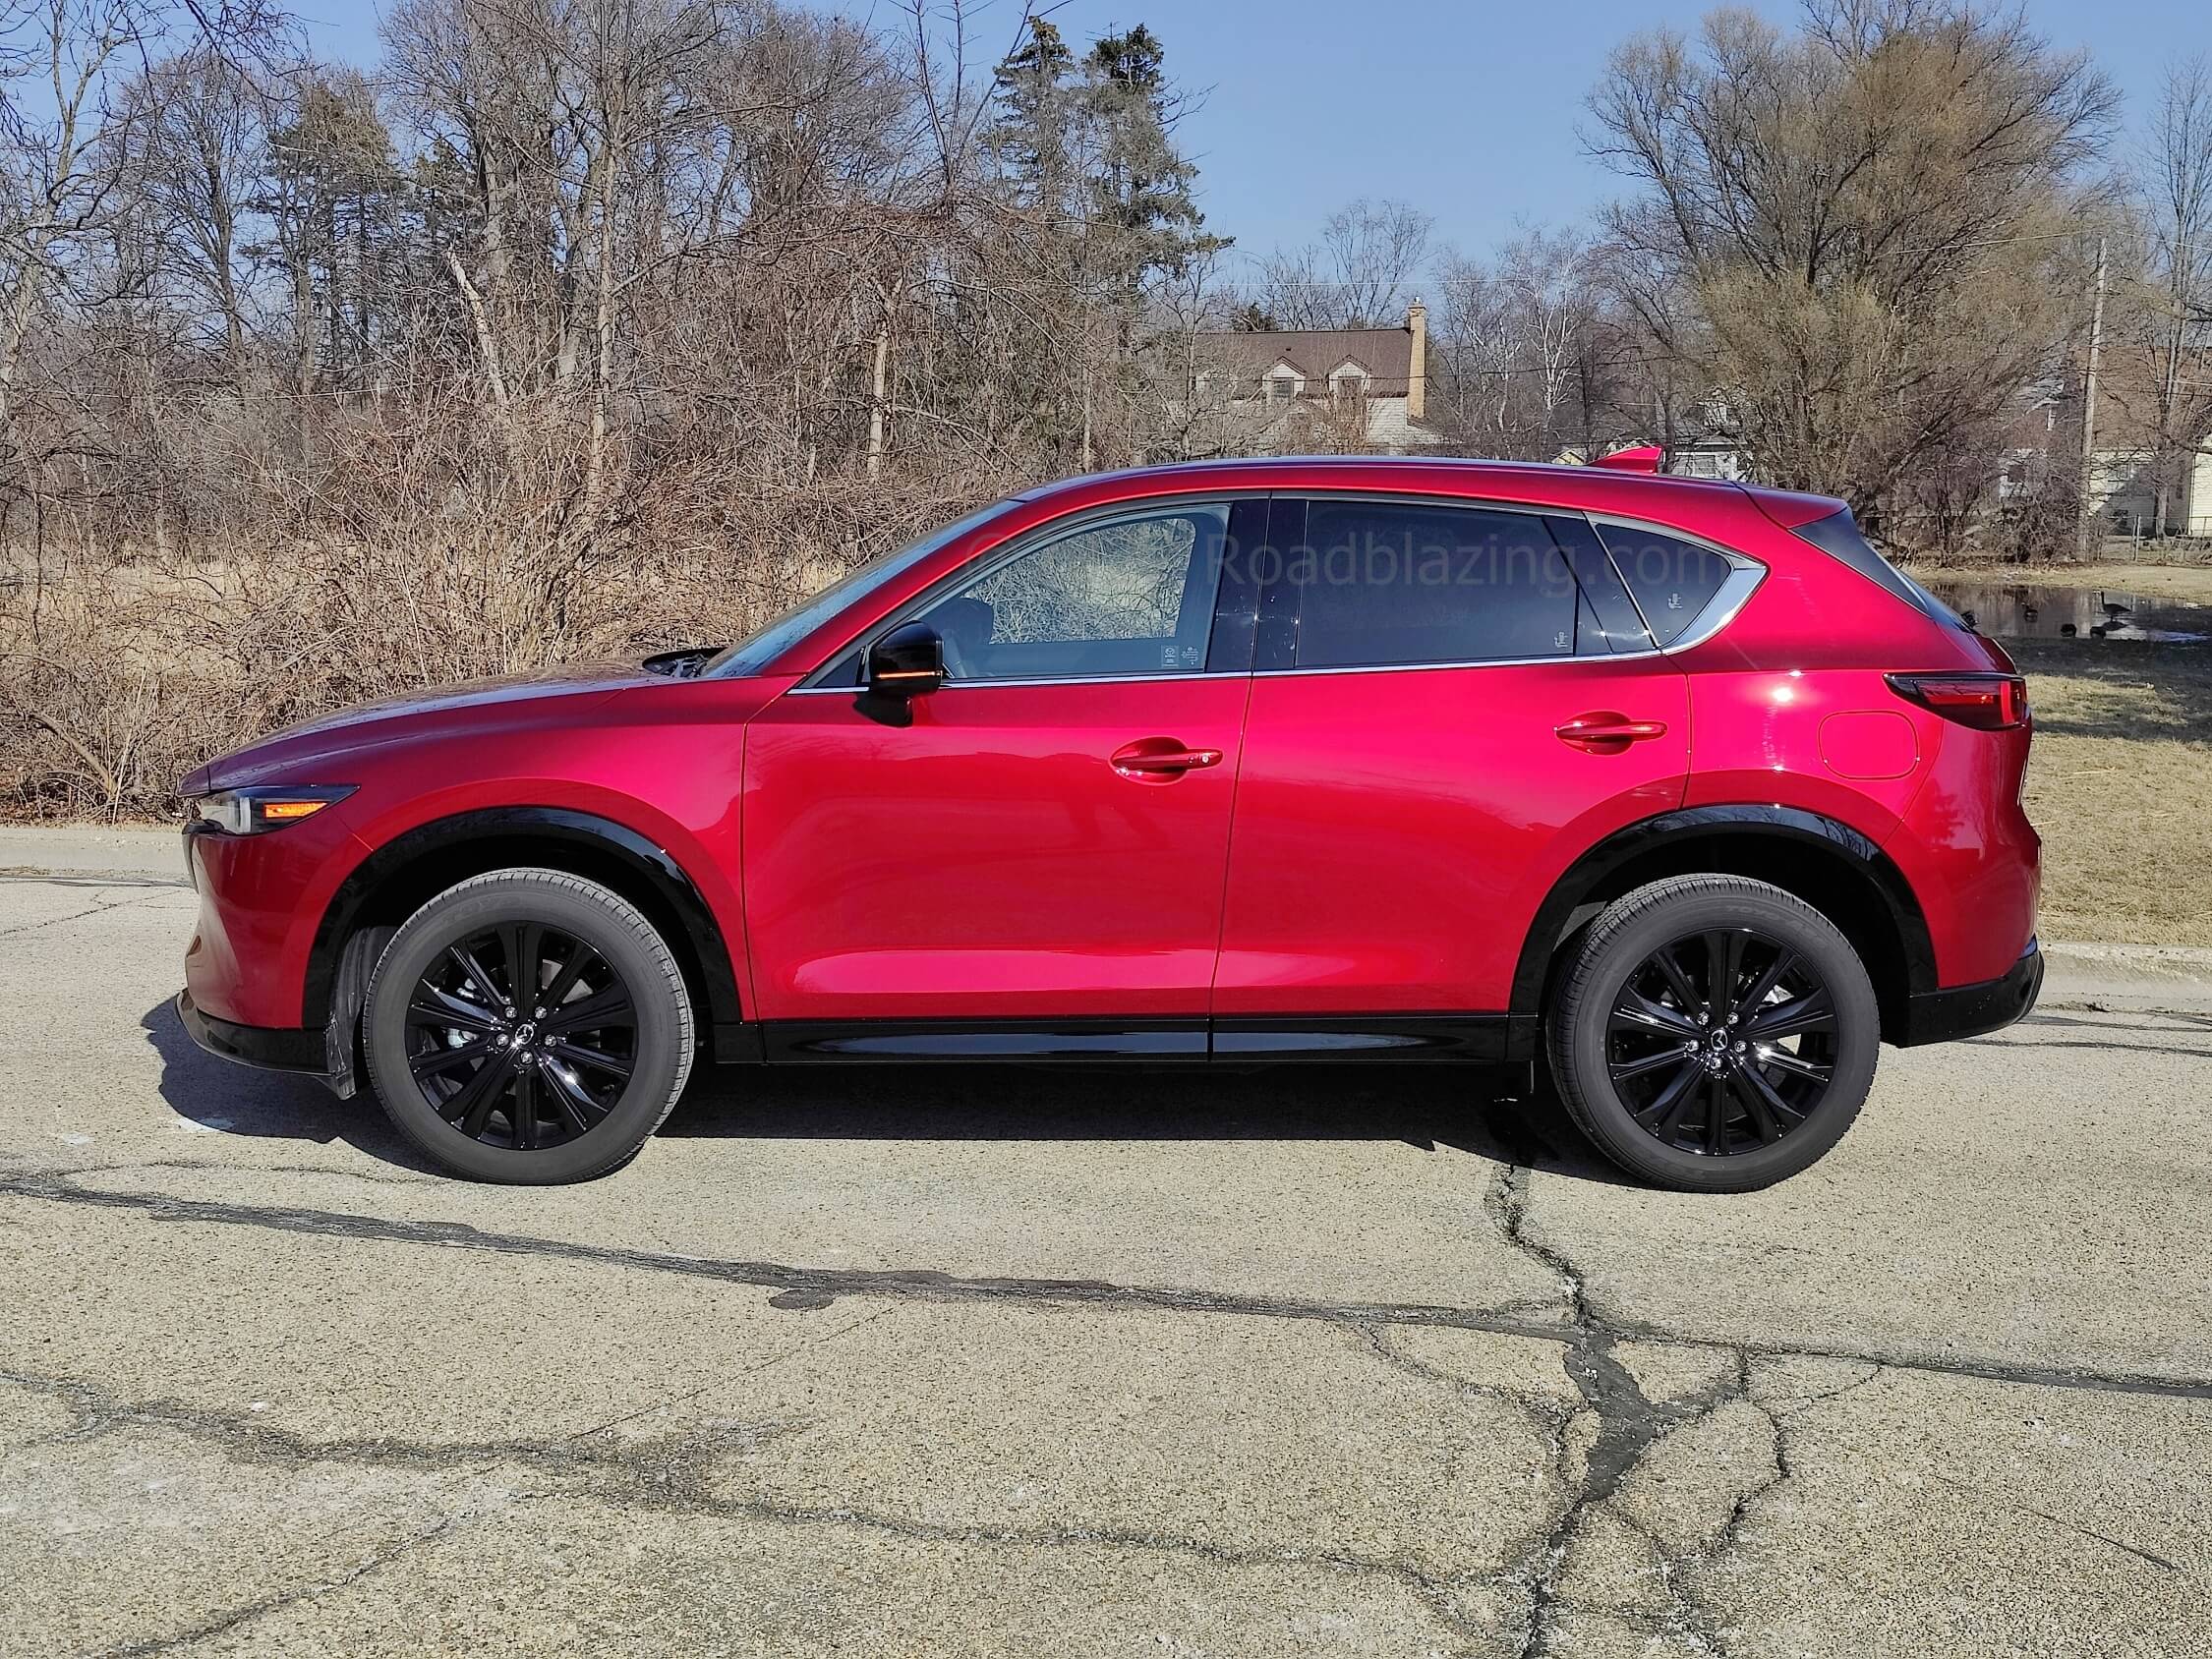 2022 Mazda CX-5 2.5T Turbo AWD: Soul Red Crystal Metallic hue contrasted by Turbo exclusive gloss black body cladding